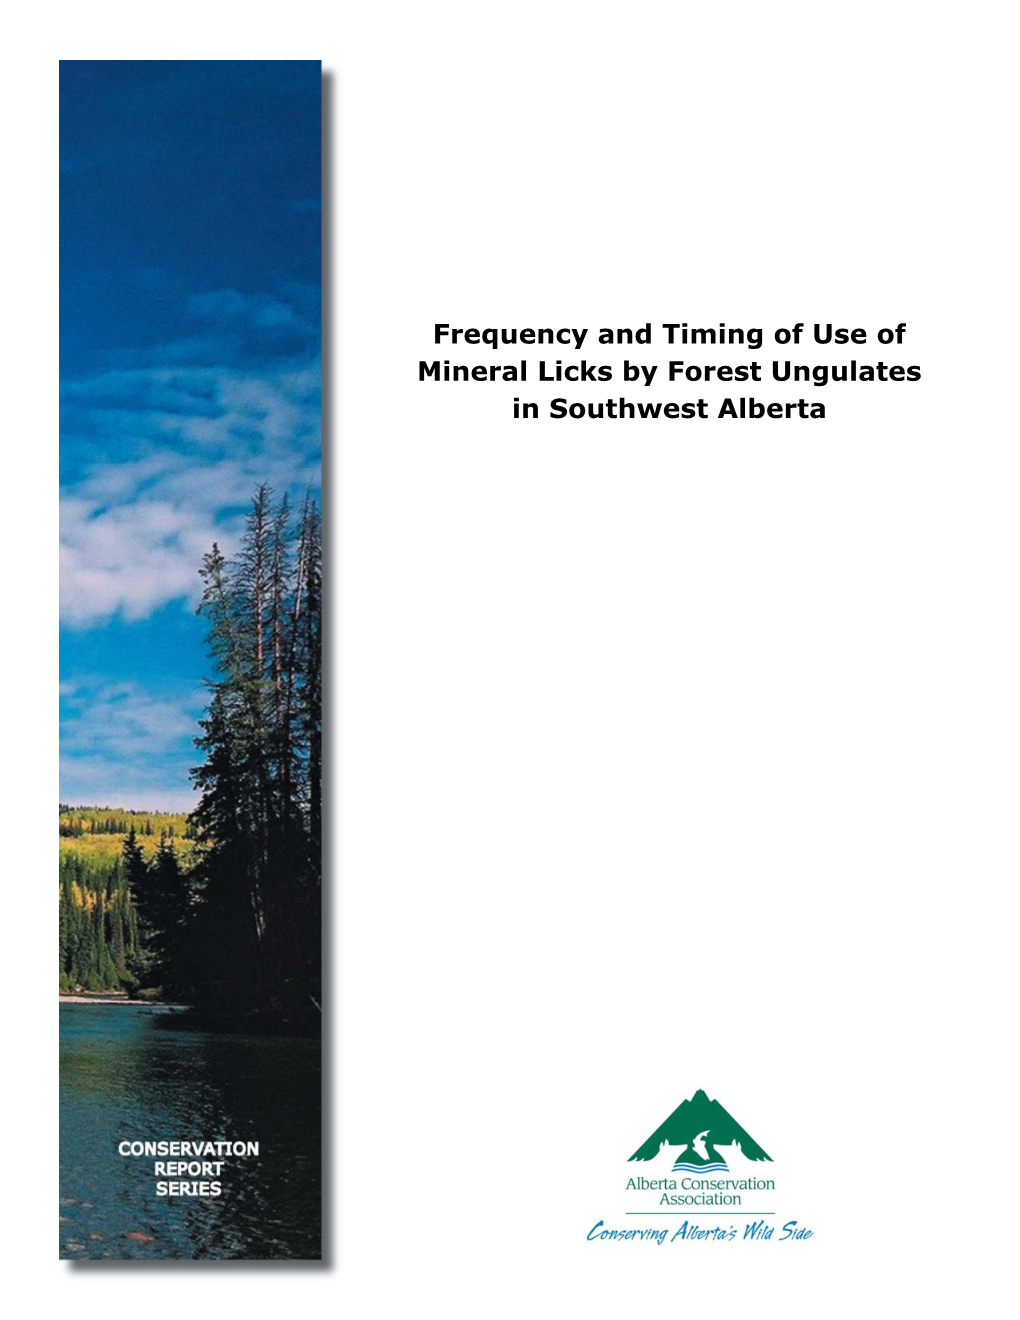 Frequency and Timing of Use of Mineral Licks by Forest Ungulates in Southwest Alberta